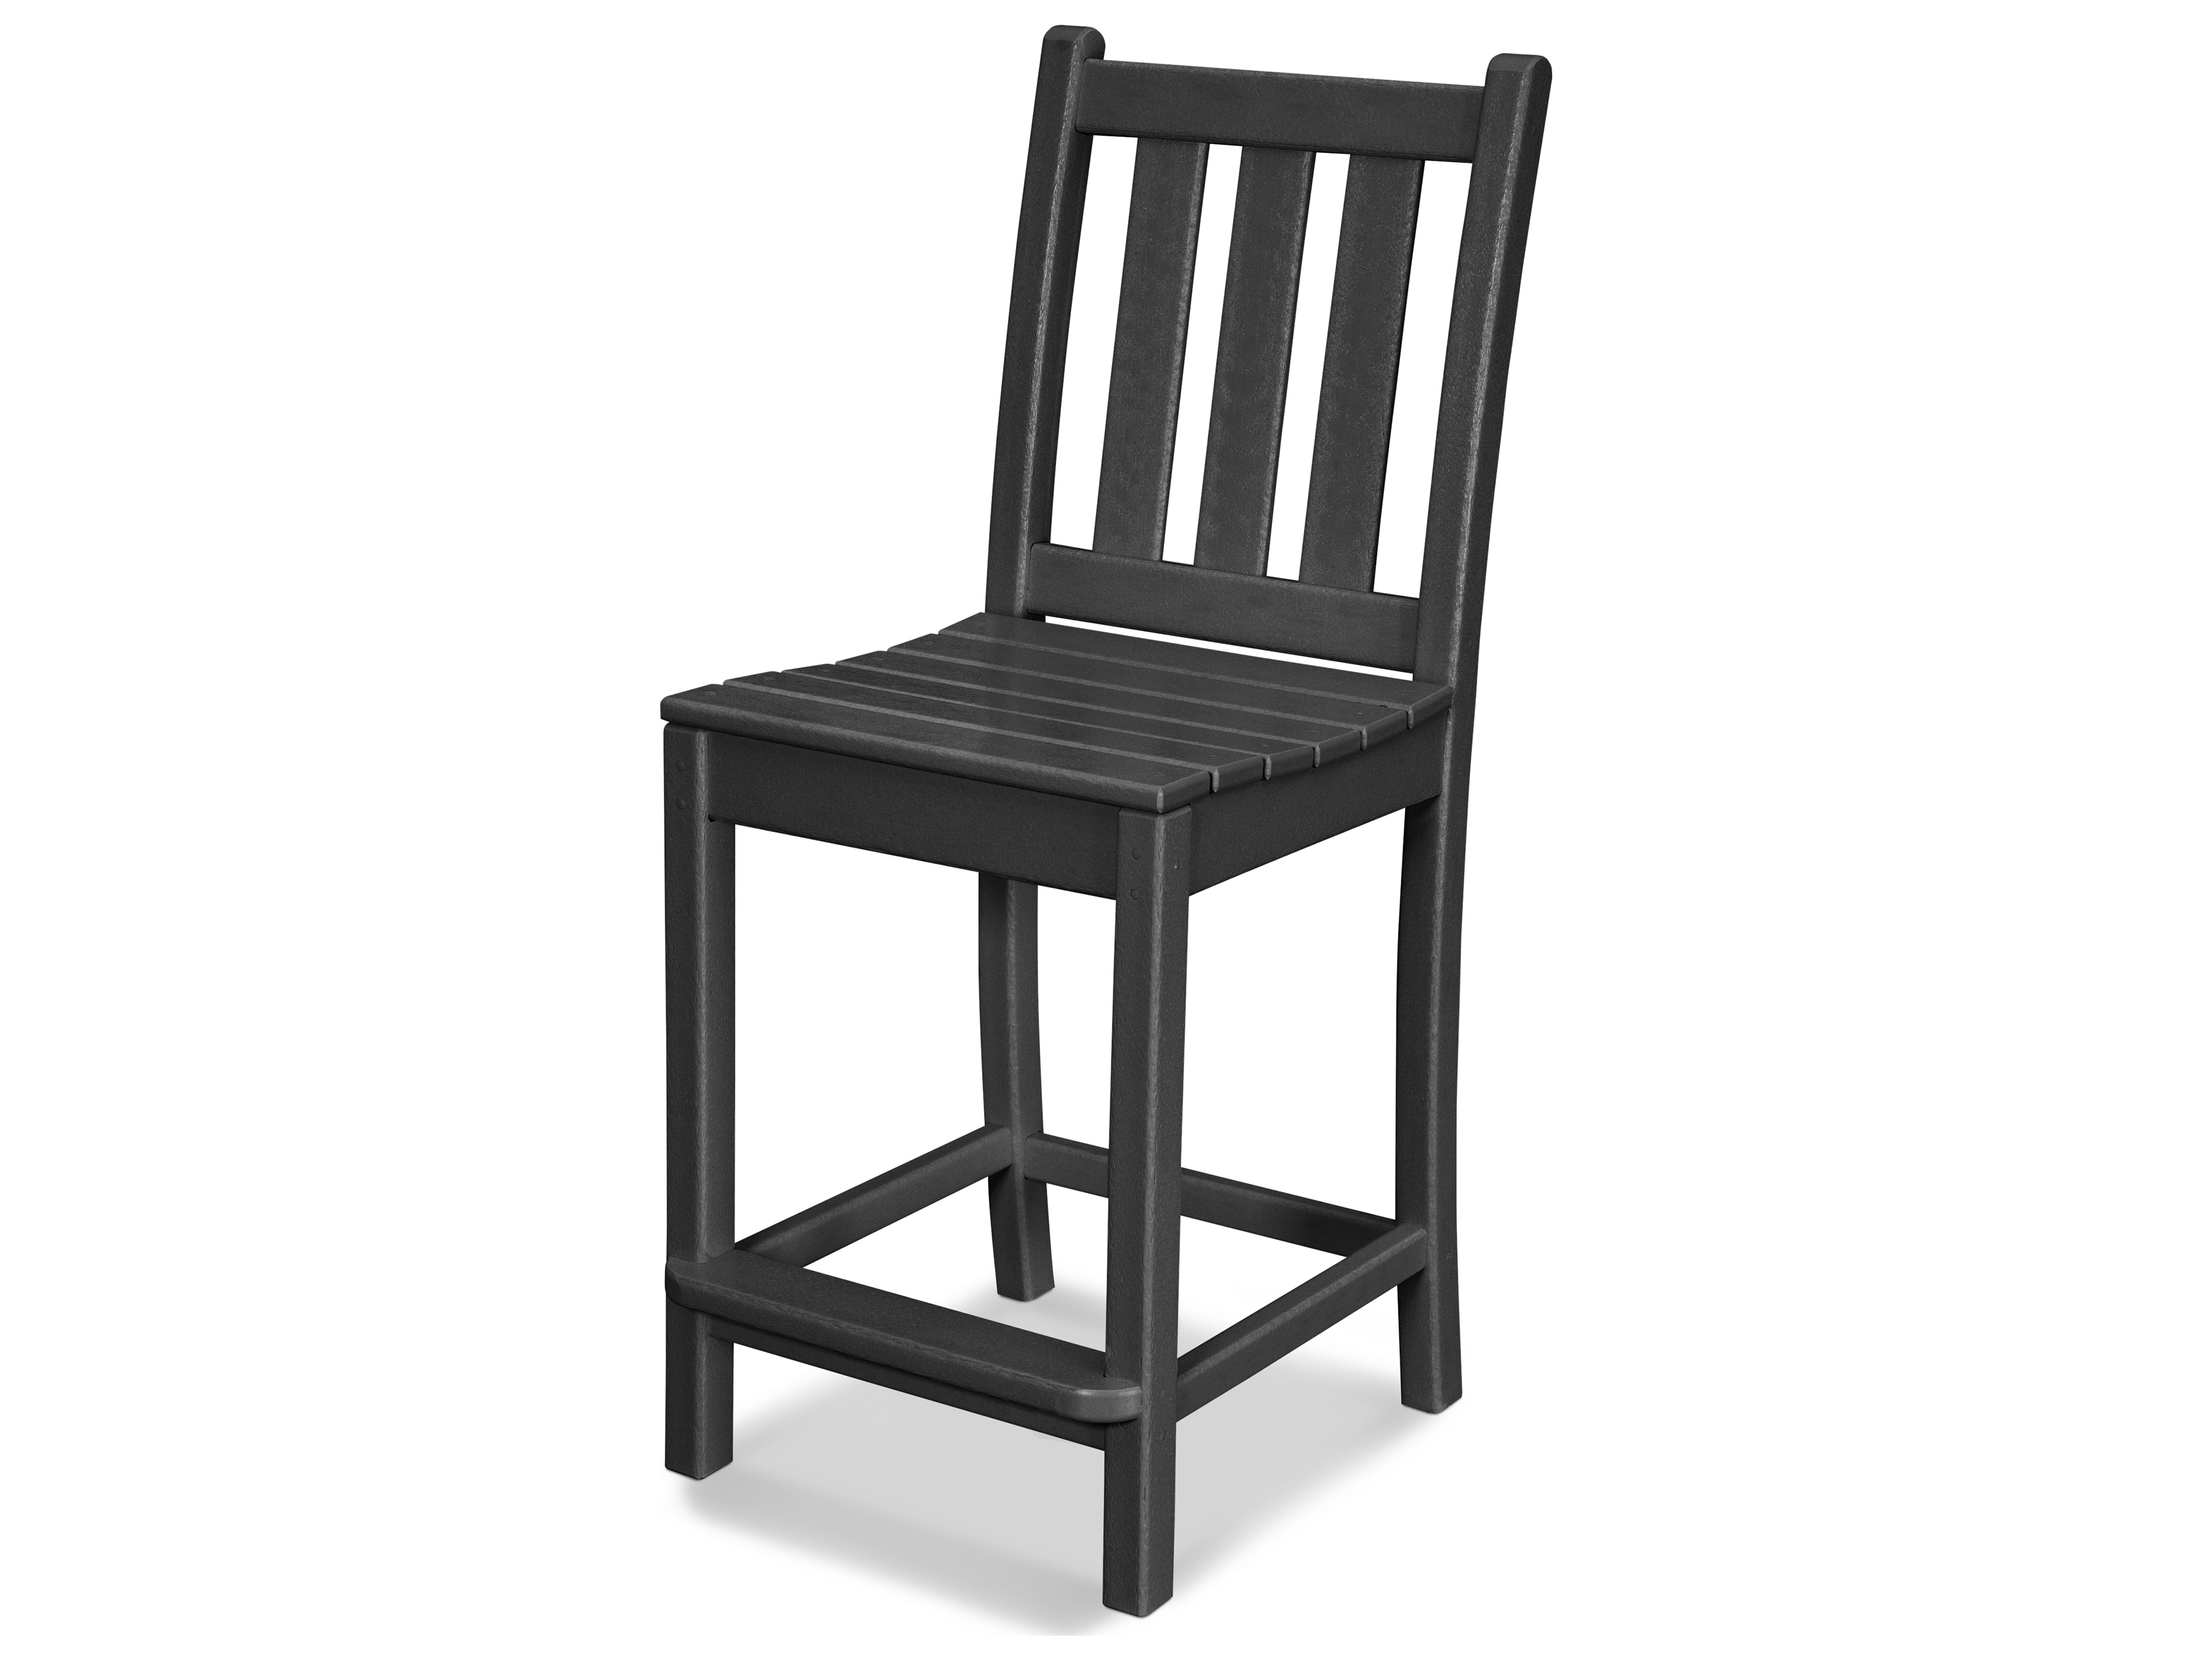 Woodard Seal Cove Dining Arm Chair Seat Replacement Cushions